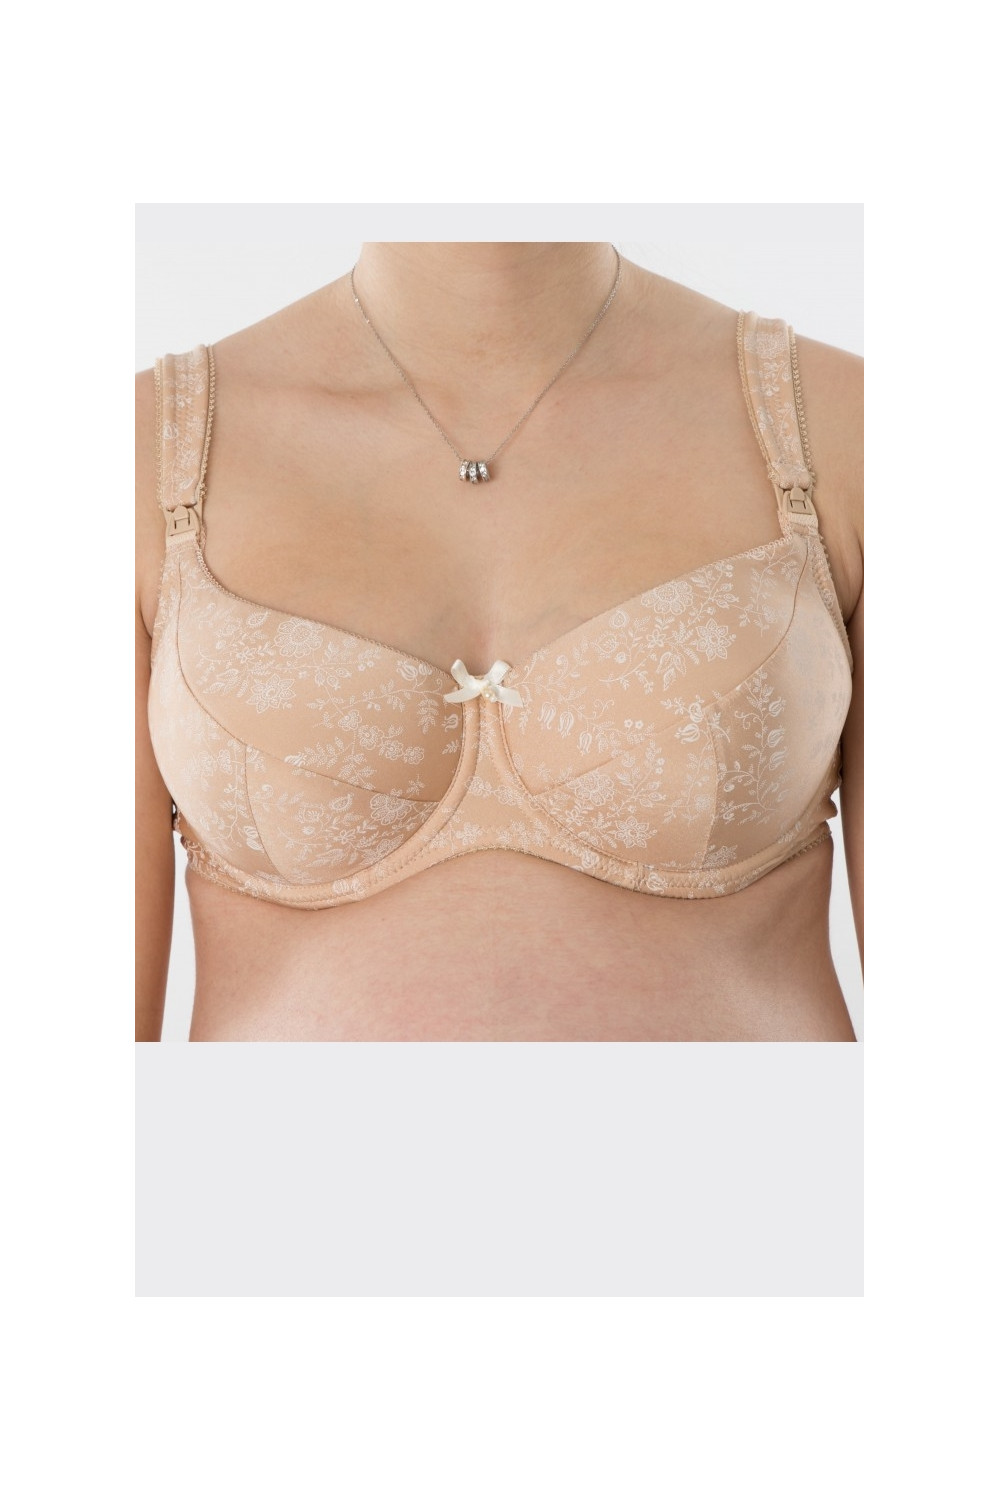 Non wired pregnancy - nursing bra with lace. Made of bamboo viscose